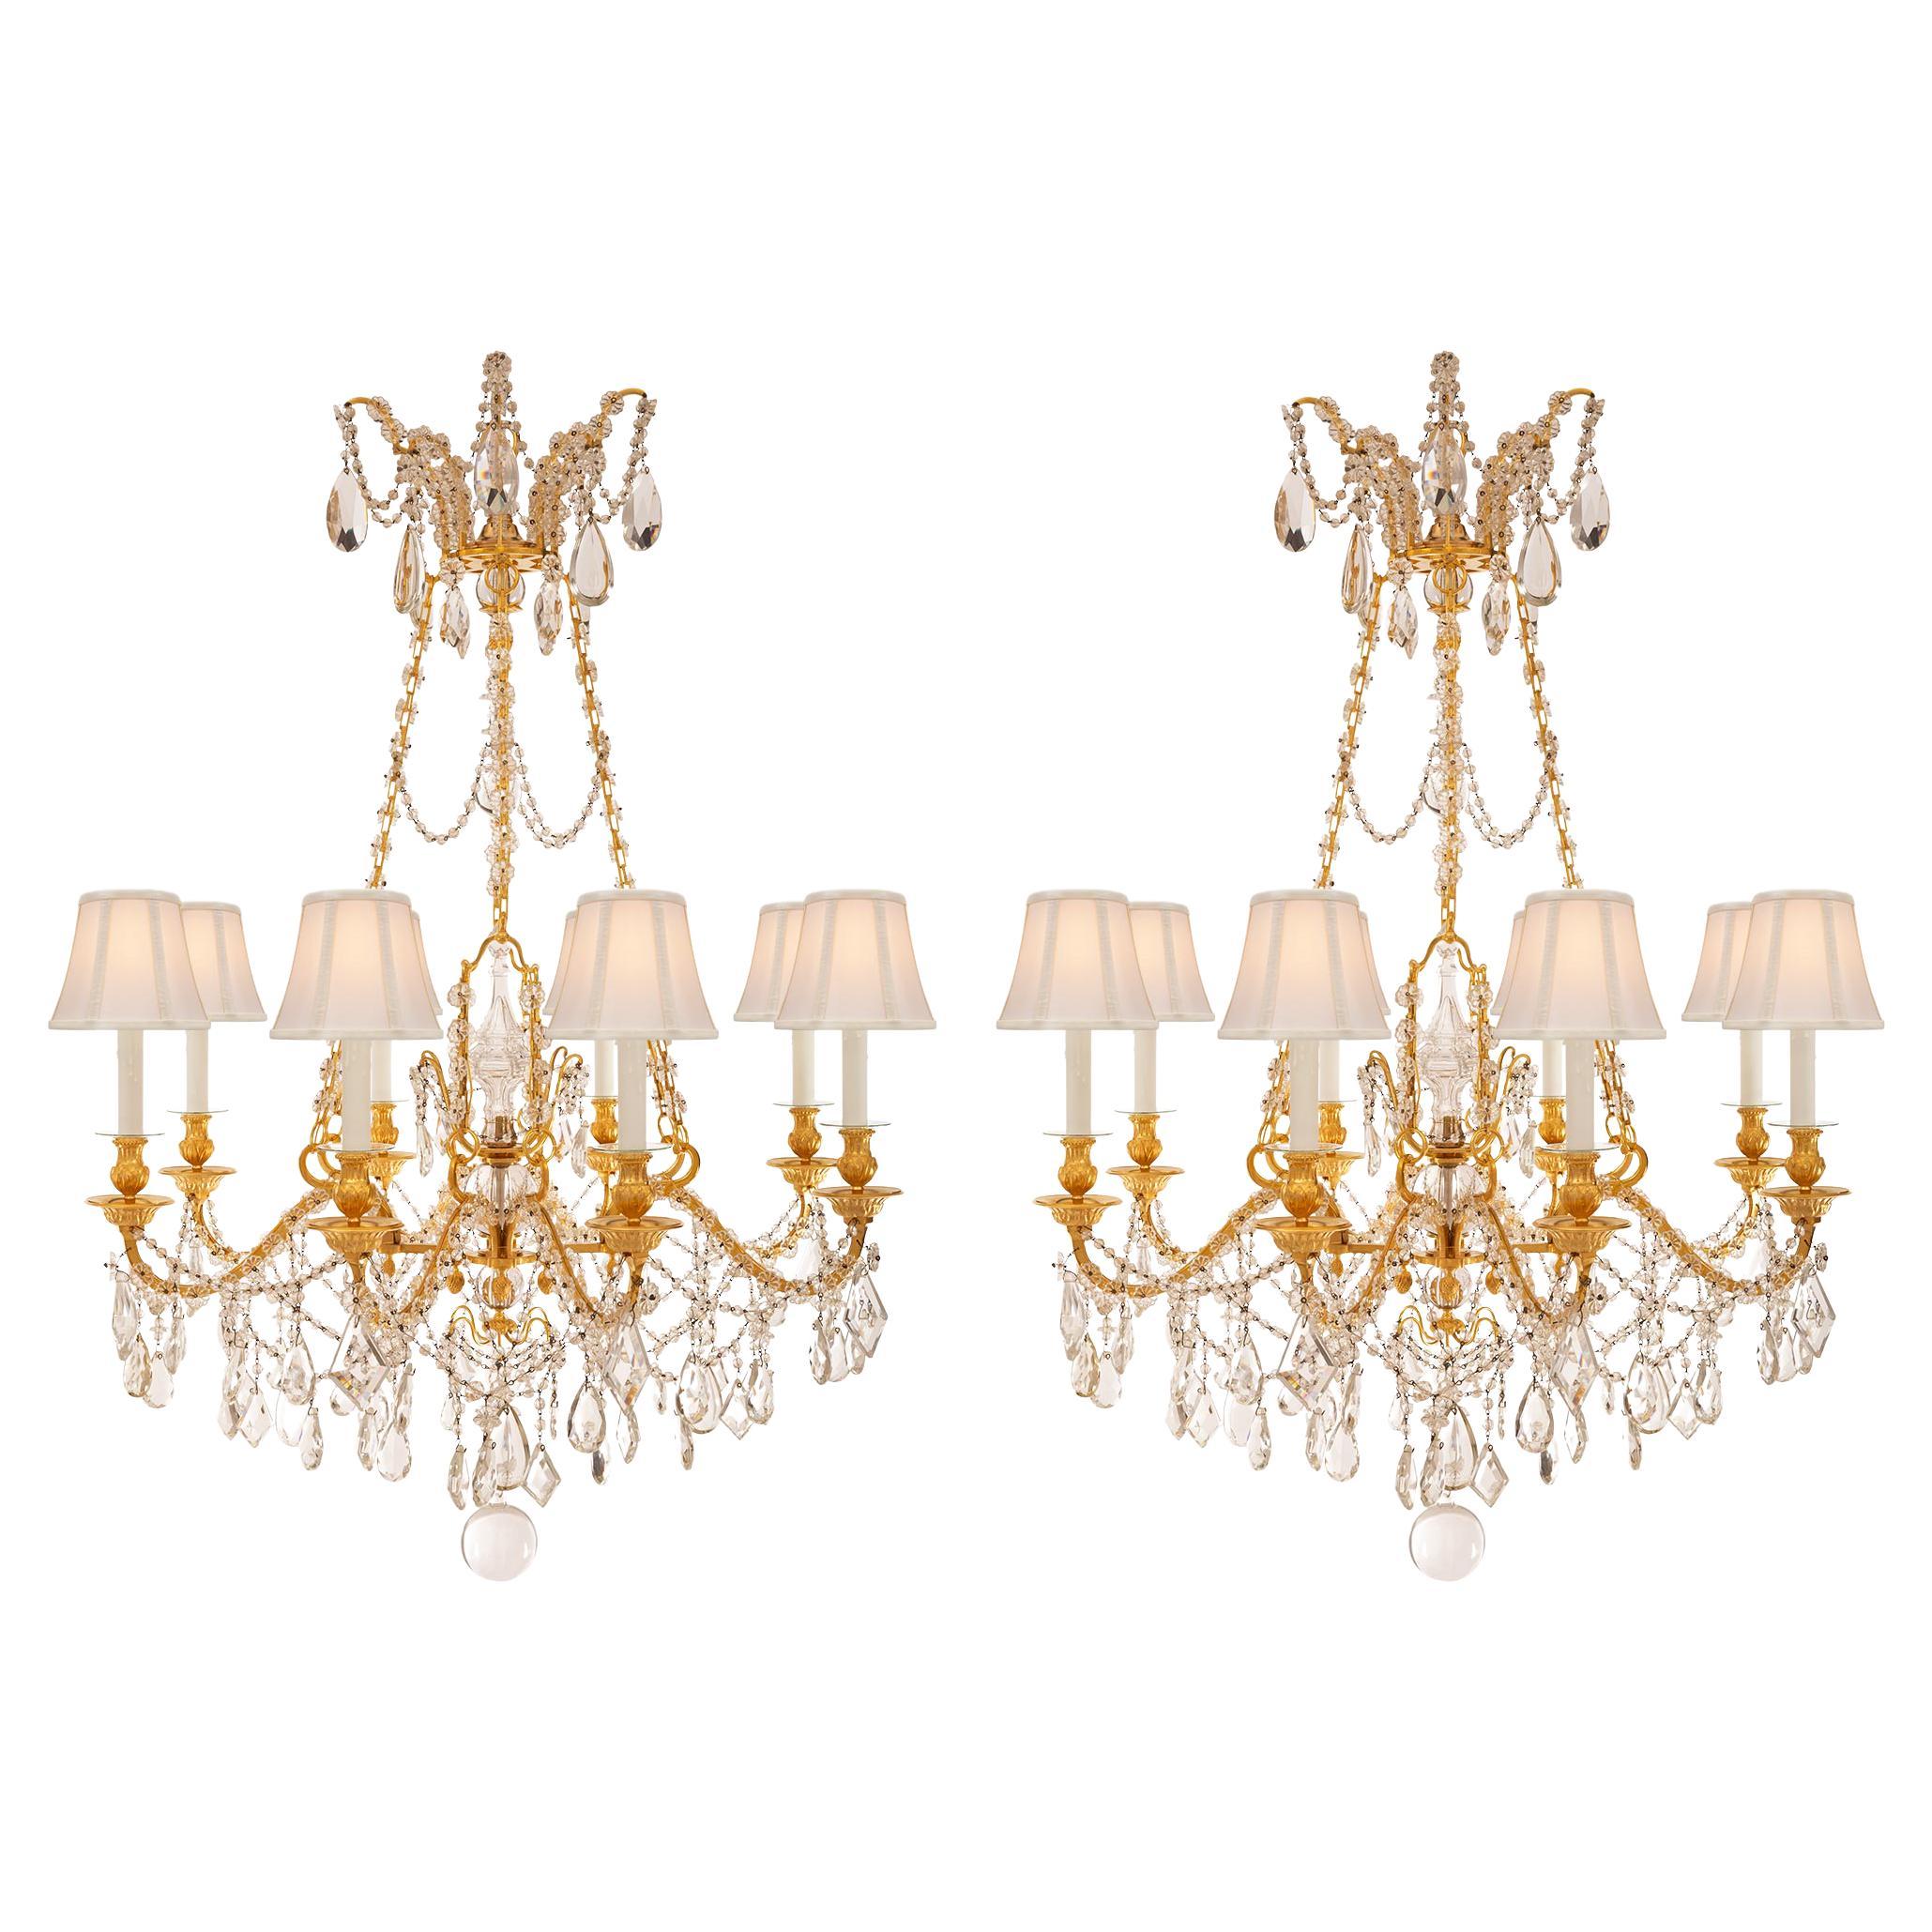 Pair of French 19th Century Louis XVI St. Ormolu and Baccarat Chandeliers